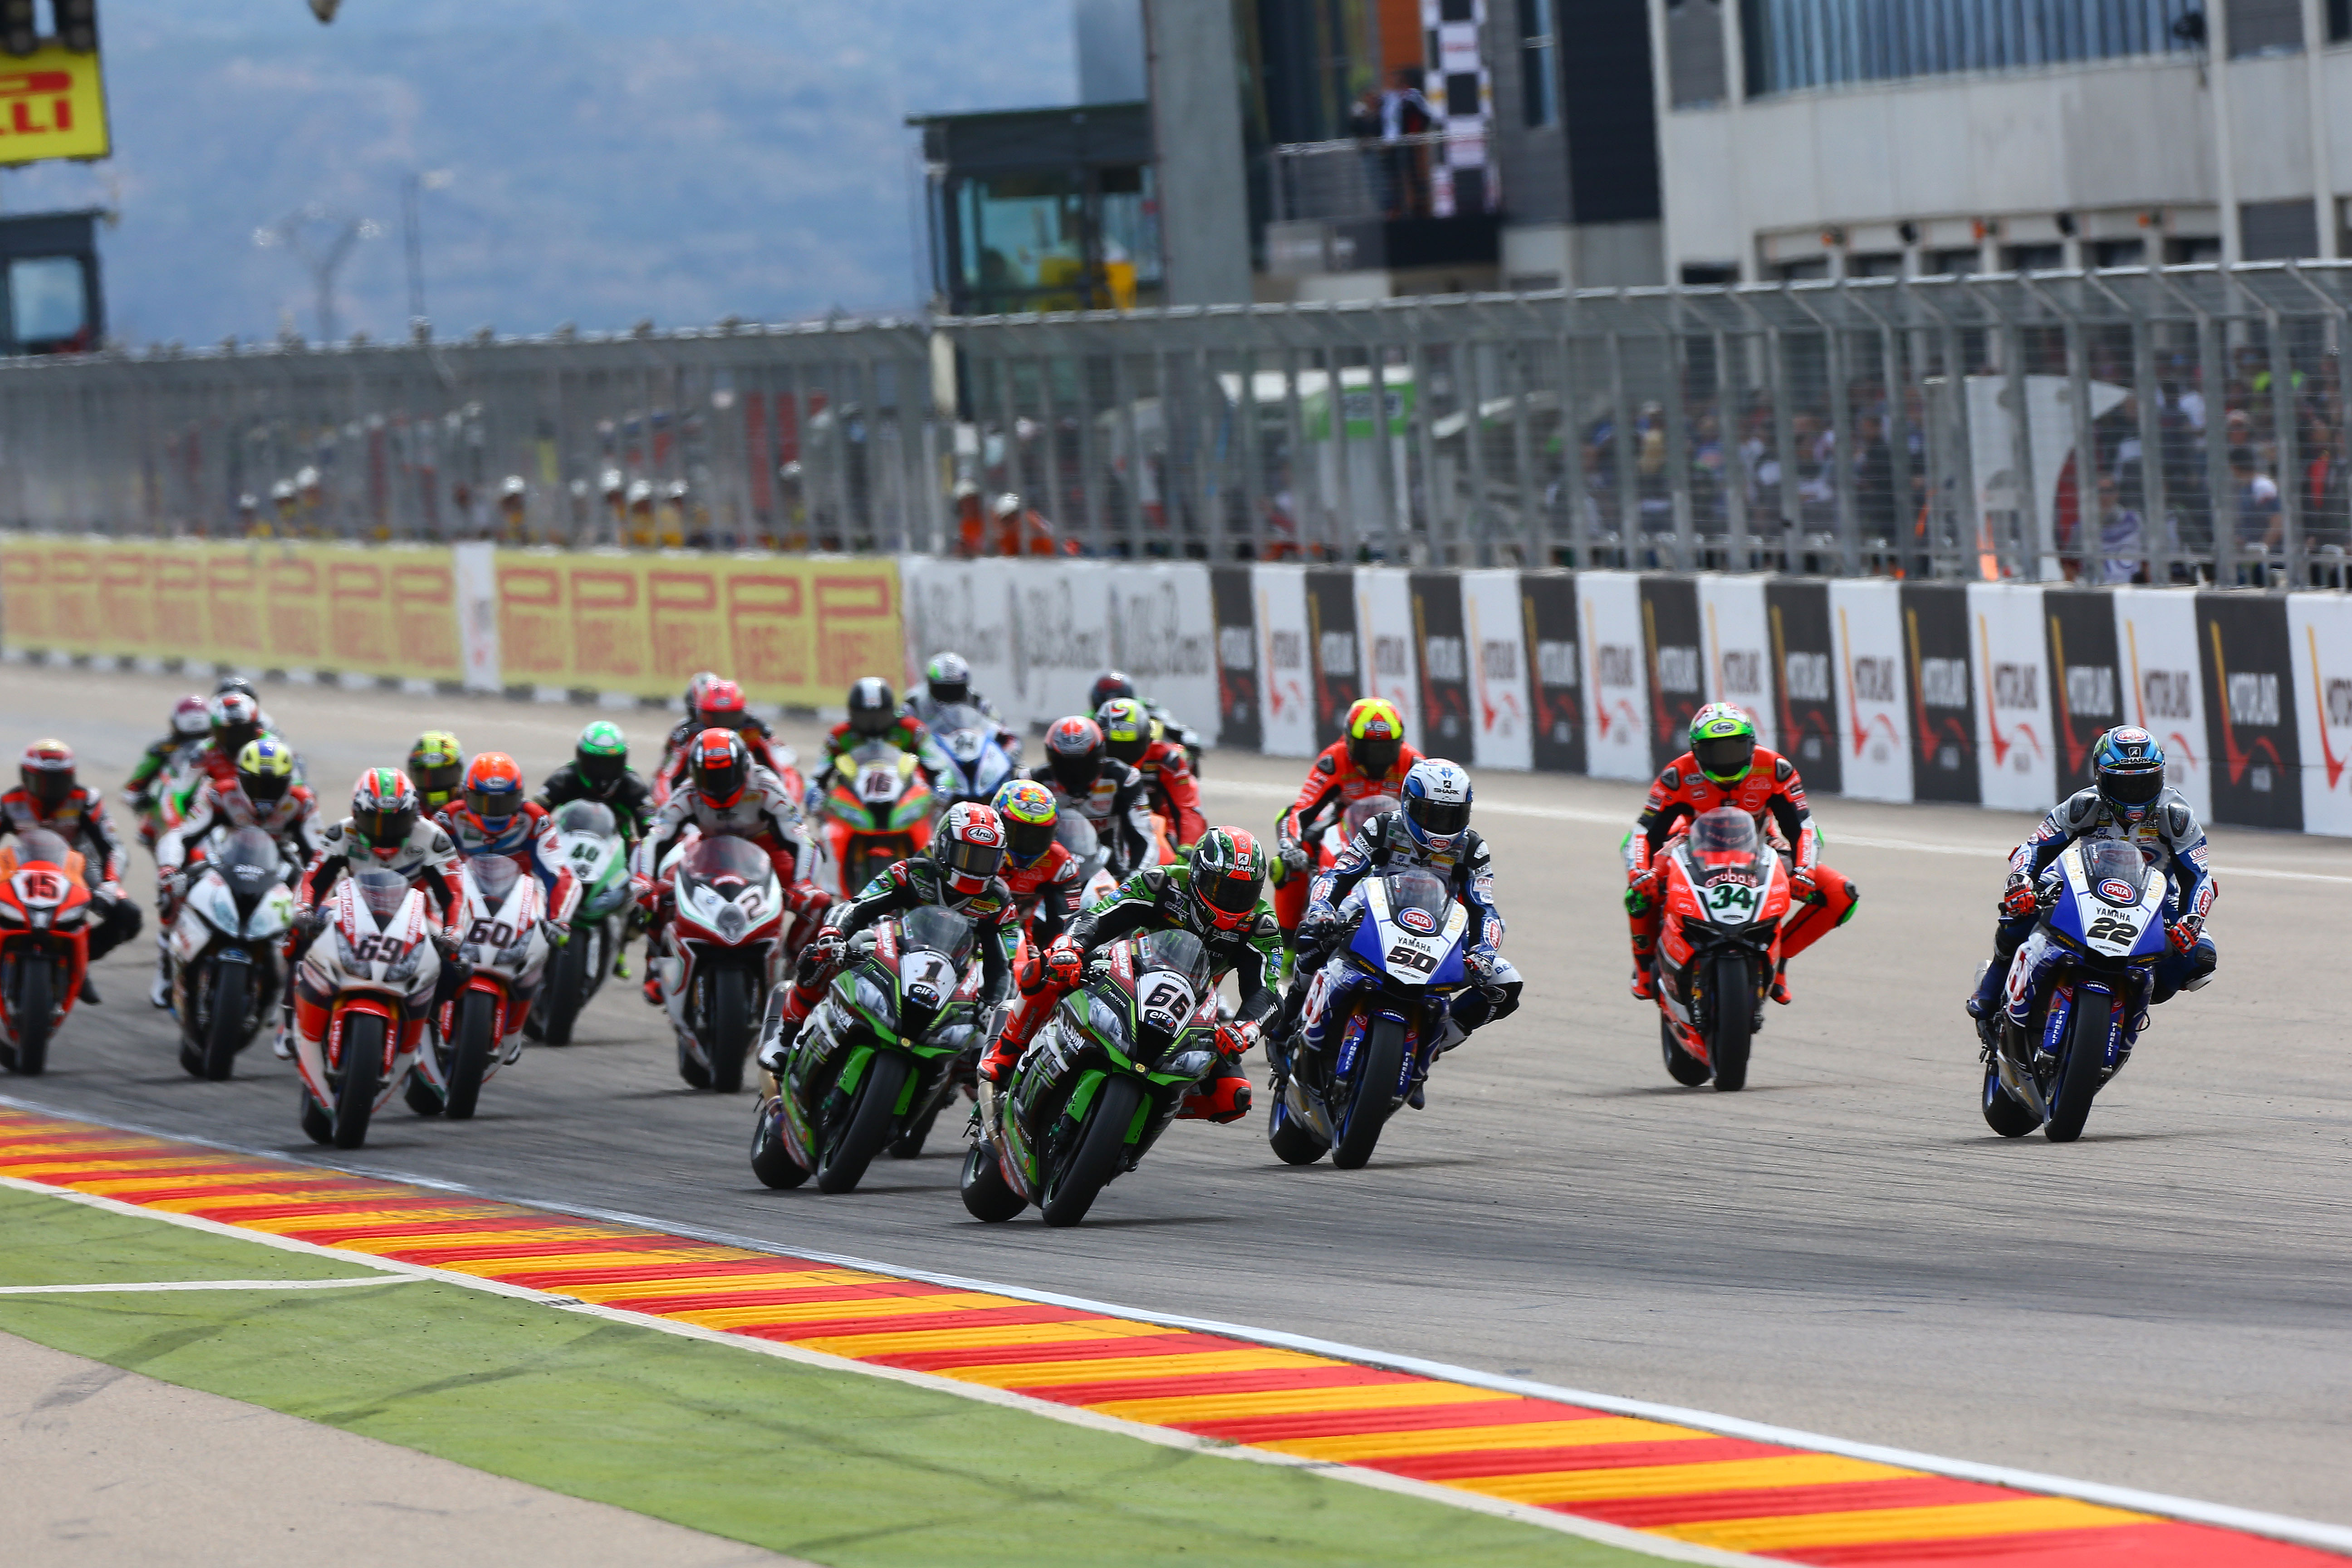 WSB 2016: Aragon race two results